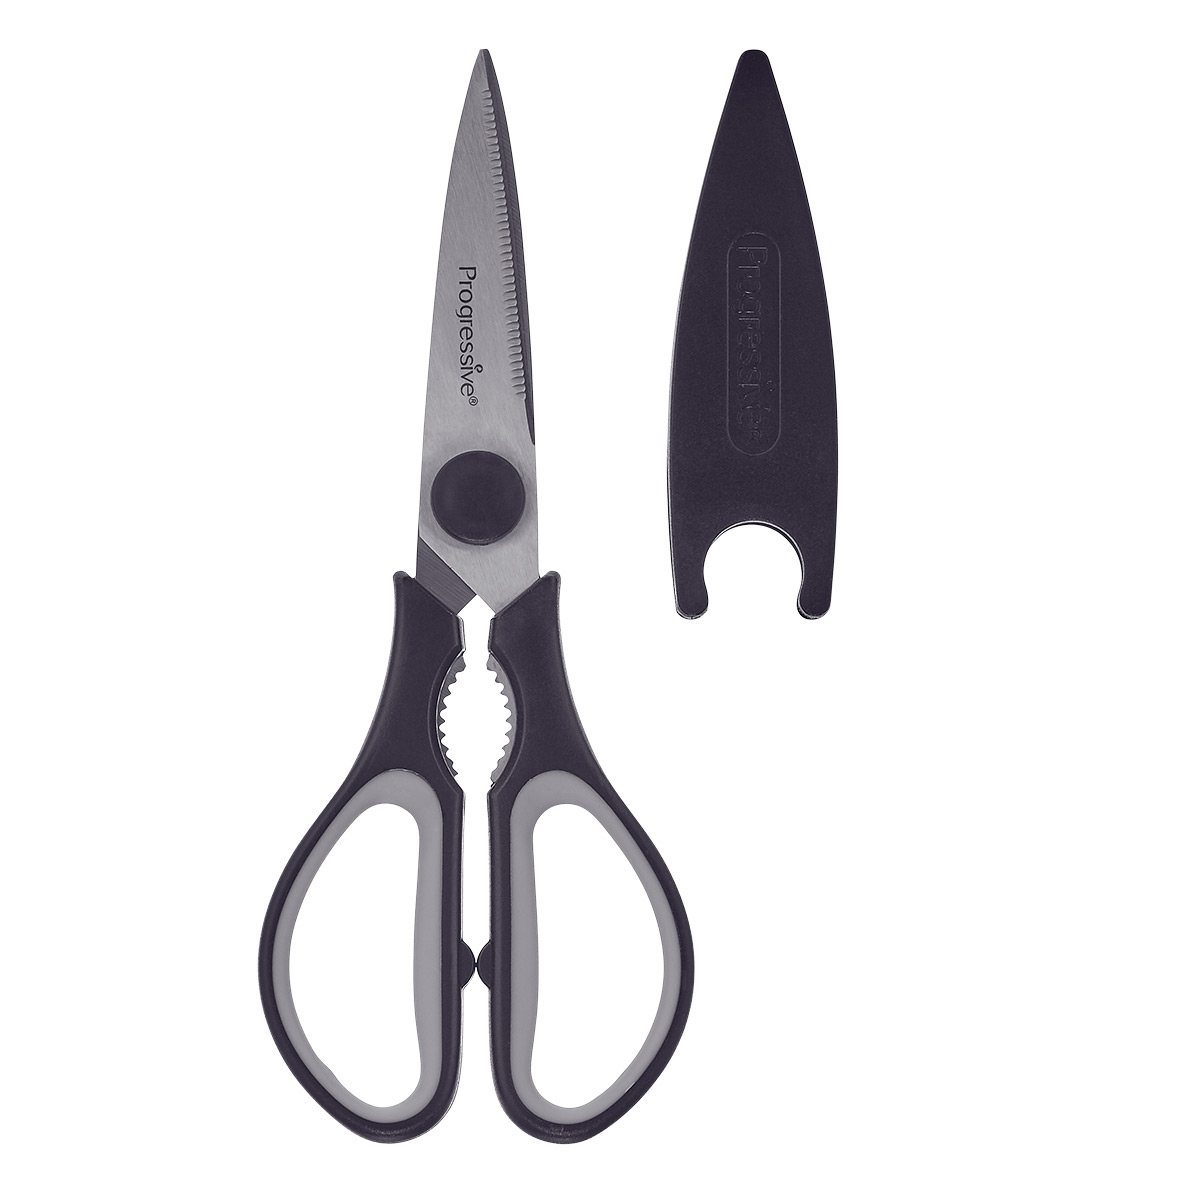 https://www.containerstore.com/catalogimages/412537/10084726_magnetic_utility_scissors_b.jpg